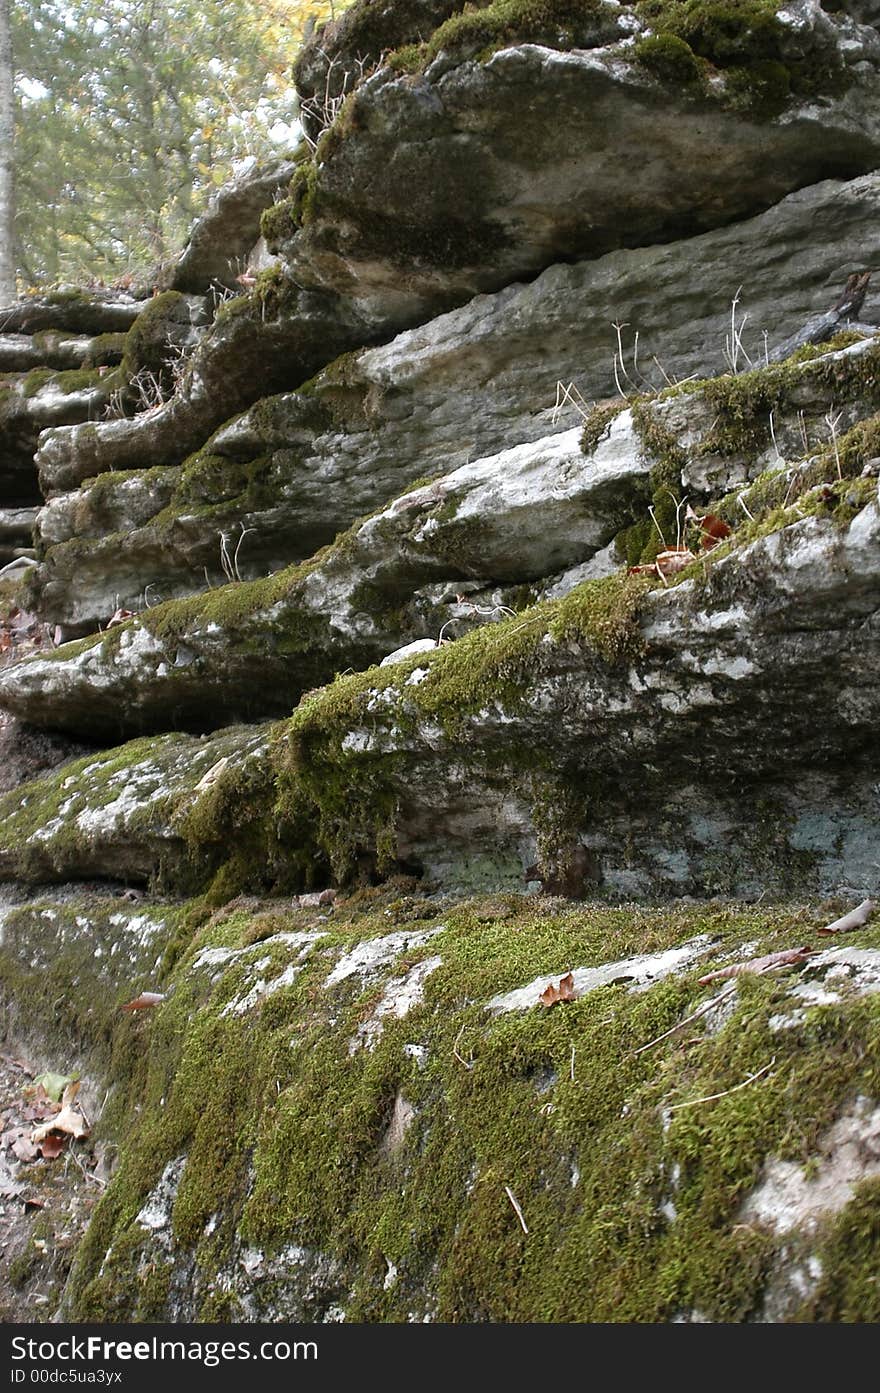 A moss covered rock wall in rural Arkansas. A moss covered rock wall in rural Arkansas.